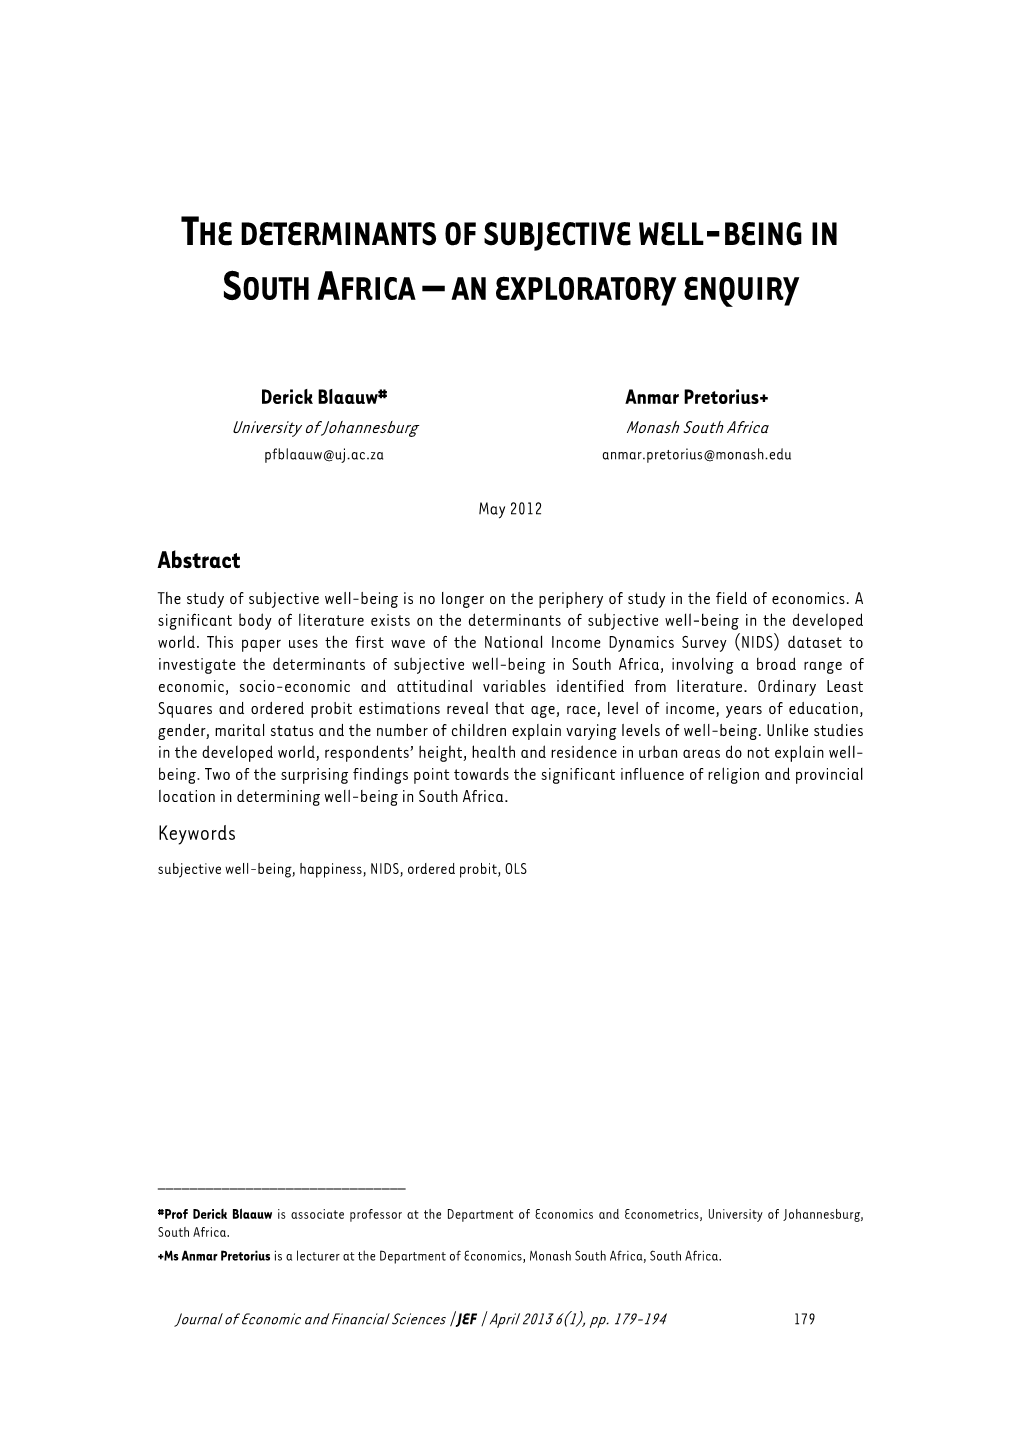 The Determinants of Subjective Well-Being in South Africa – an Exploratory Enquiry